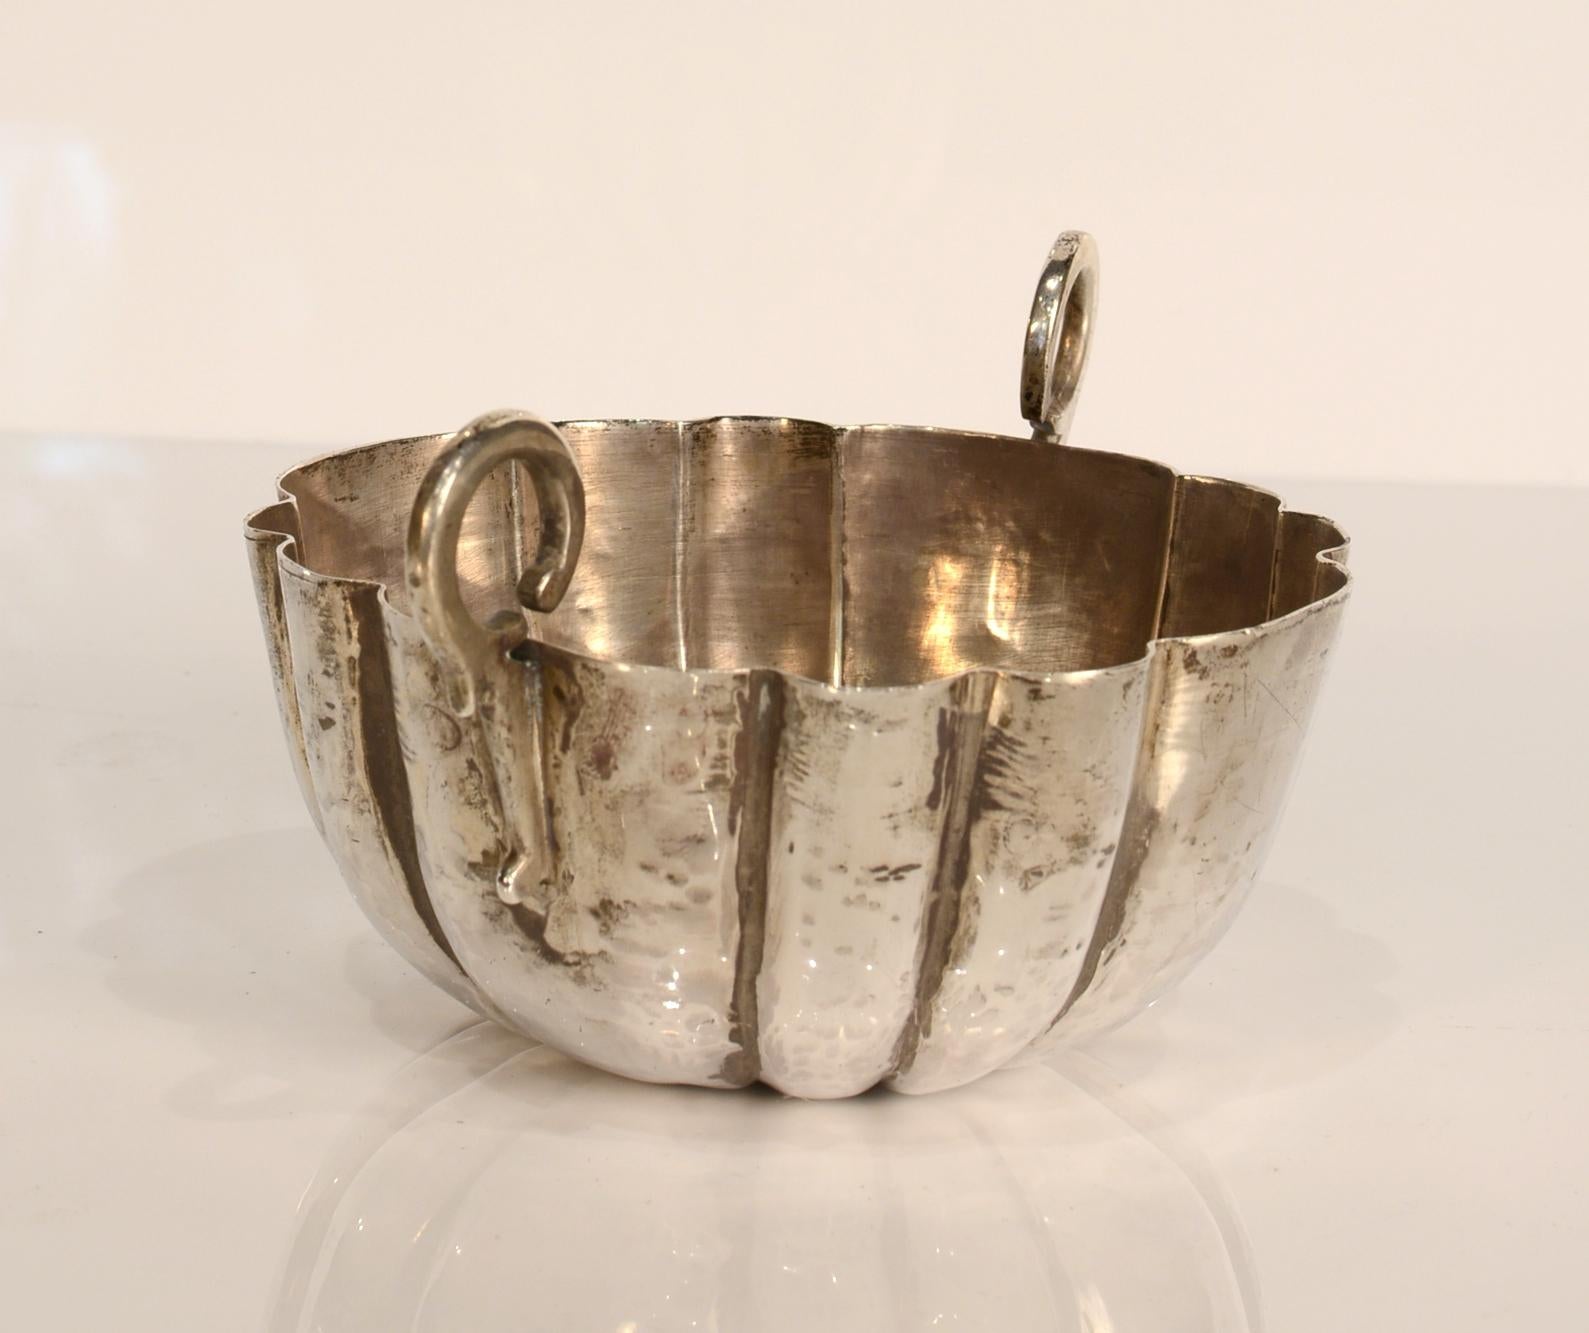 Solid silver cup, 20th century.
Bernegal gallonado made in silver in its color with two circular handles on the sides. It clearly follows examples of ancient silverware, in Spanish Baroque concrete, both in its form and in those decorative elements